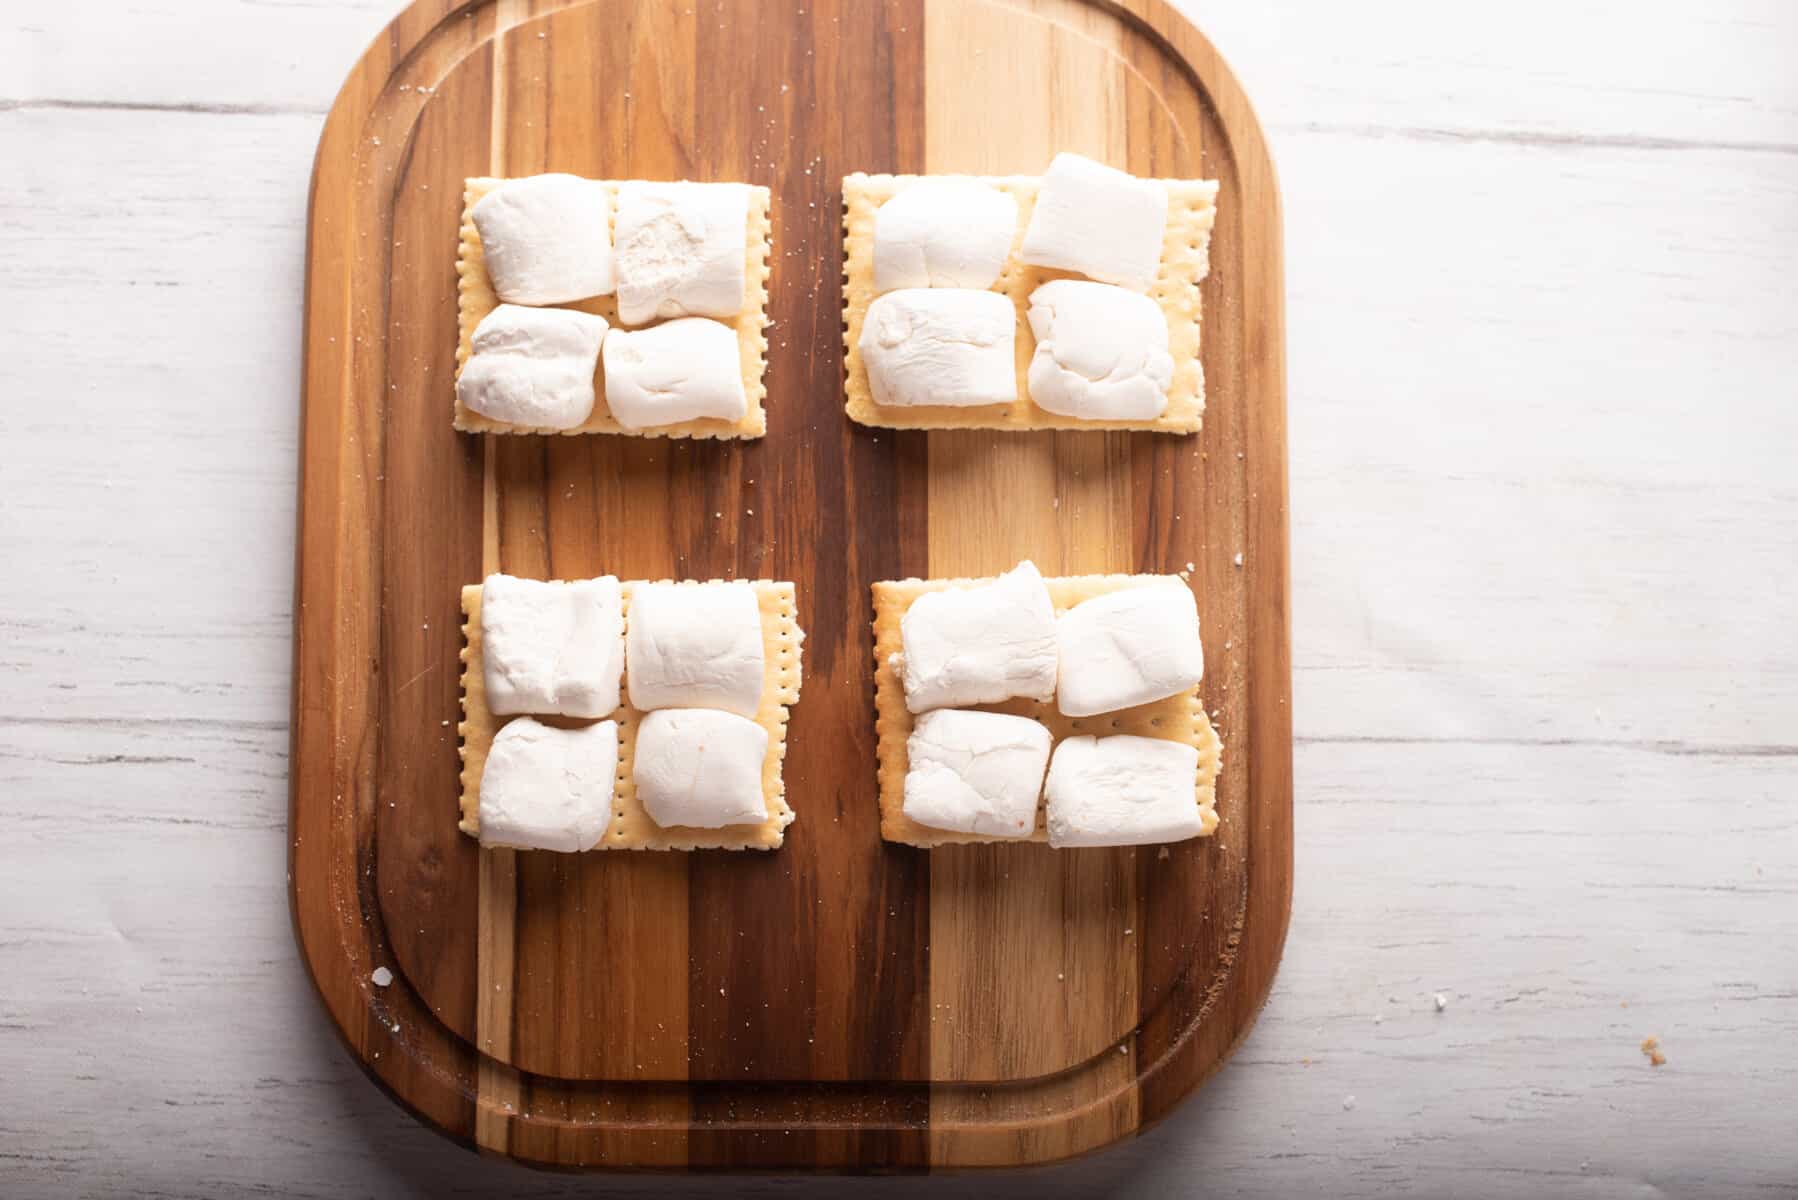 Overhead view of marshmallows cut in half and placed above the wooden board.